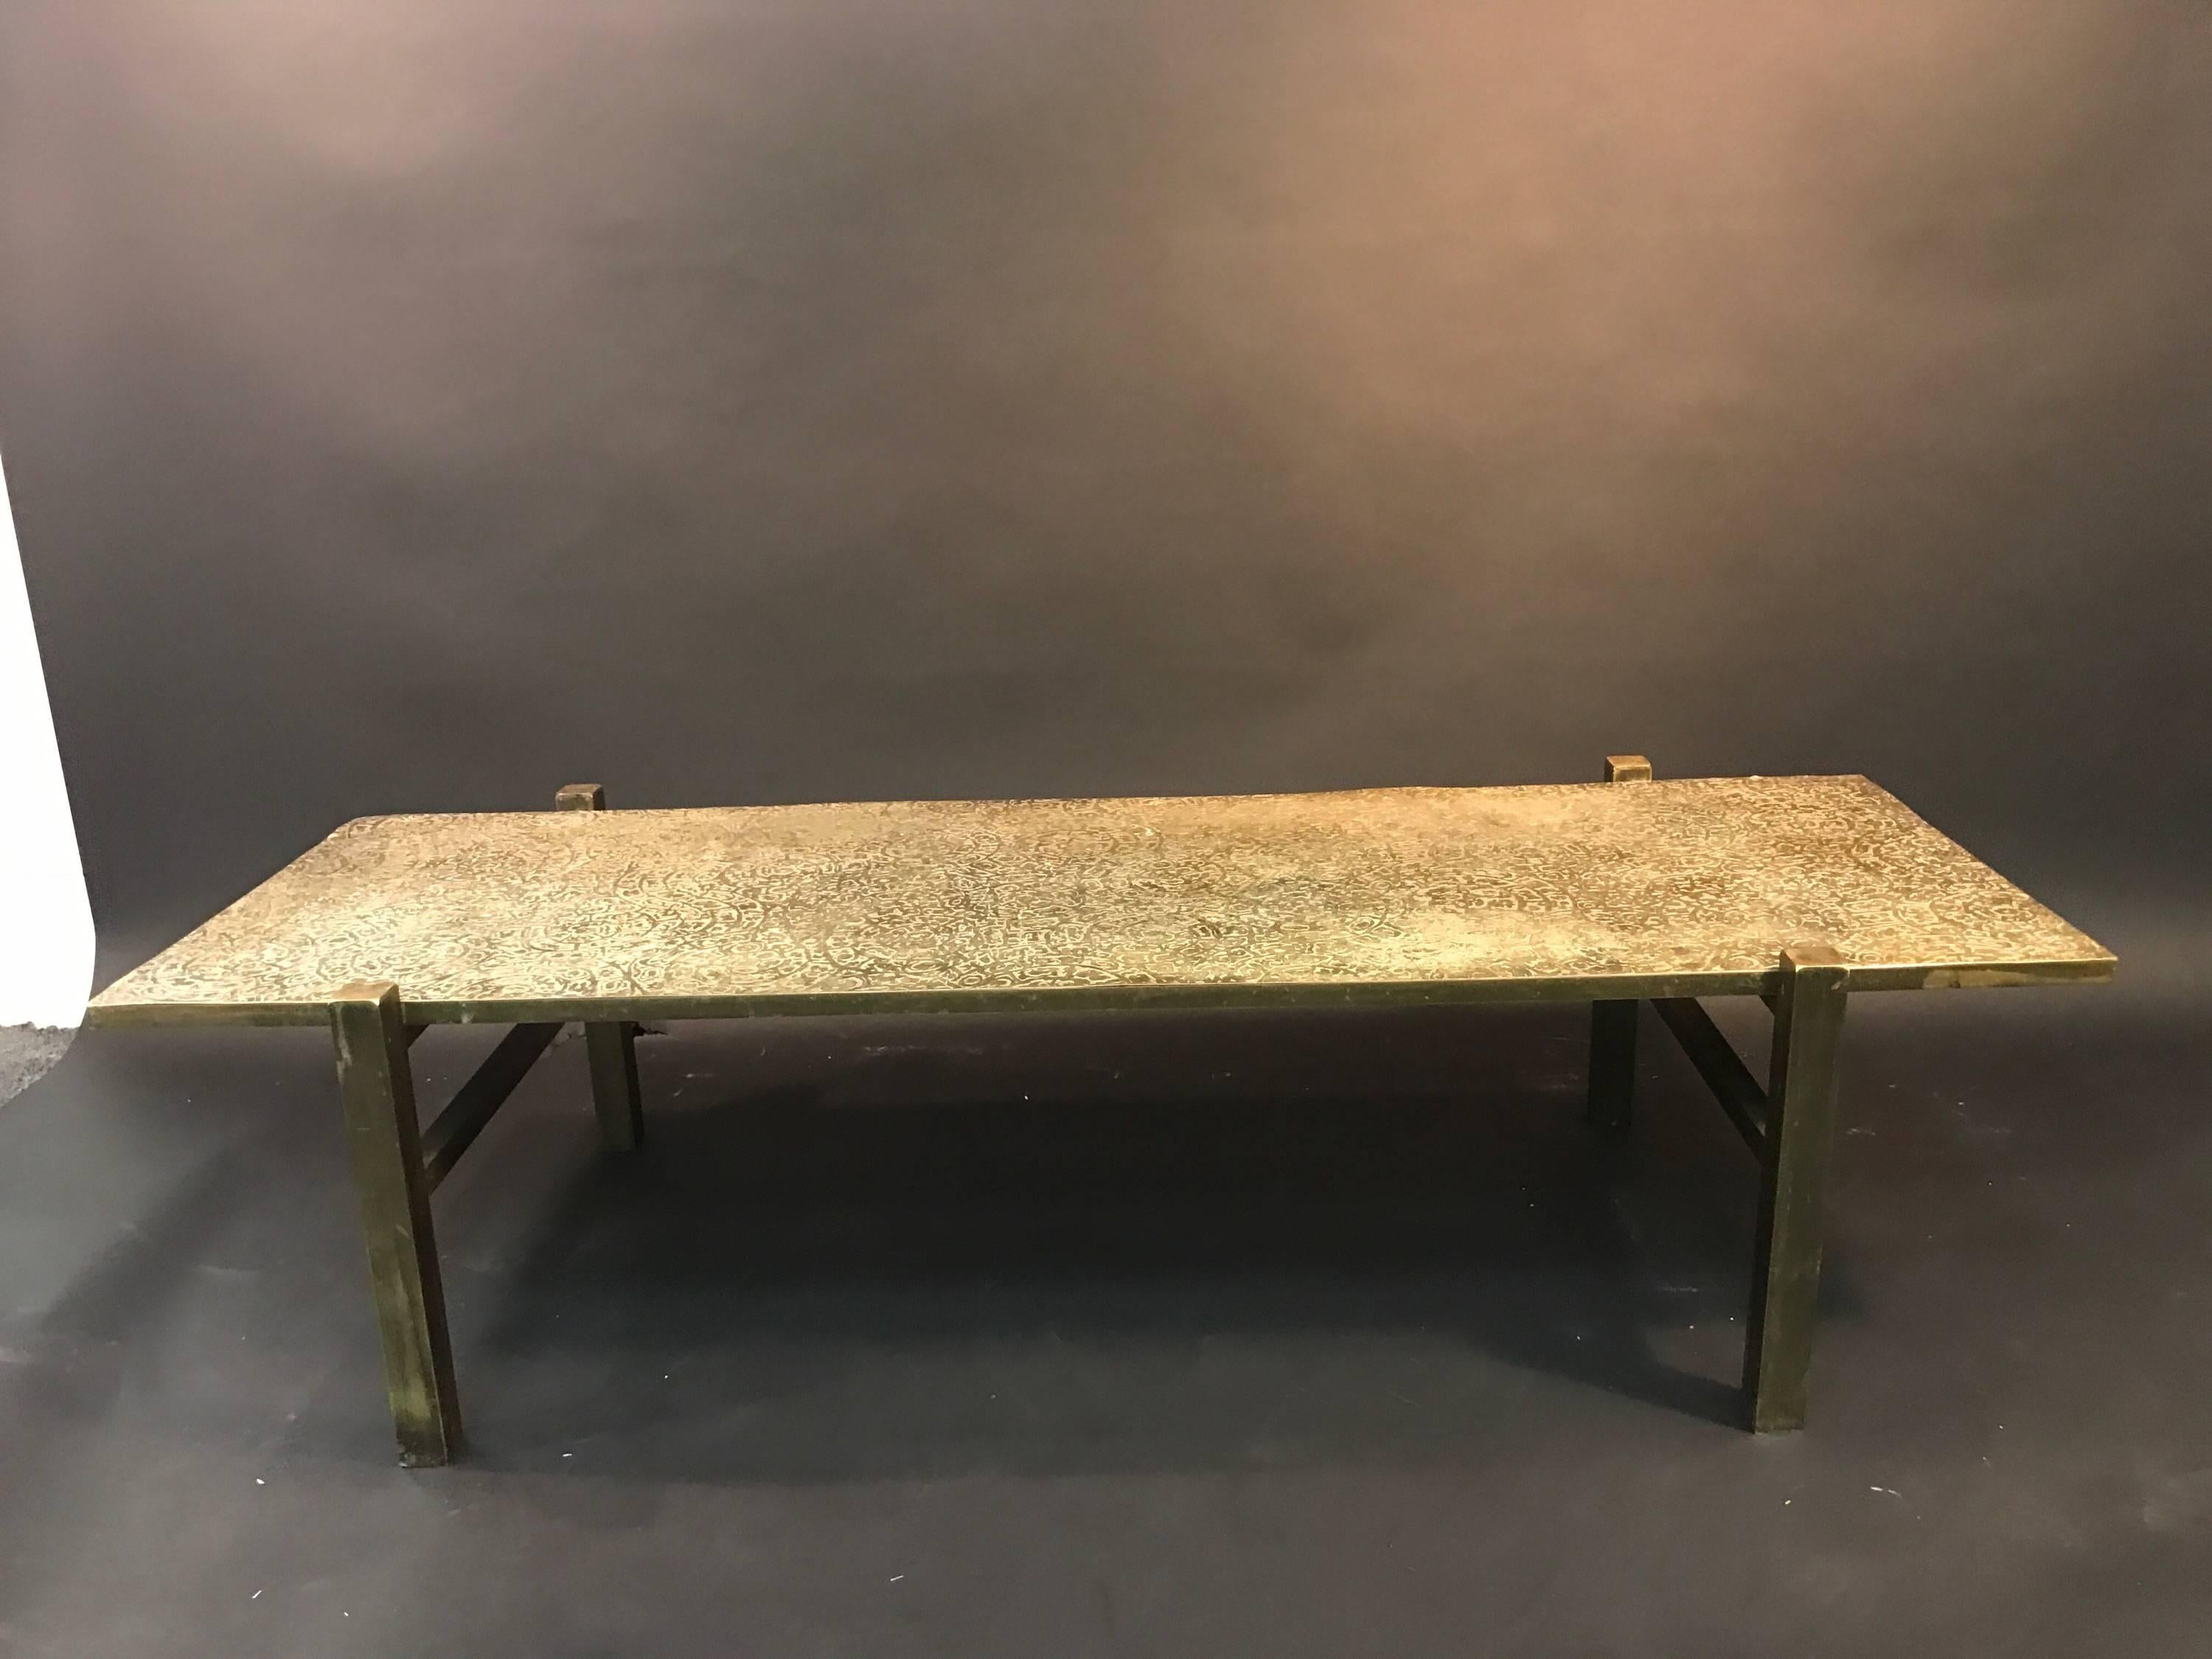 Beautiful rectangular coffee table with great bronze laminate mounted on wood table with an rare and early design by Philip and Kelvin LaVerne. Signed P K Laverne this is a piece that would suit many high end interiors.